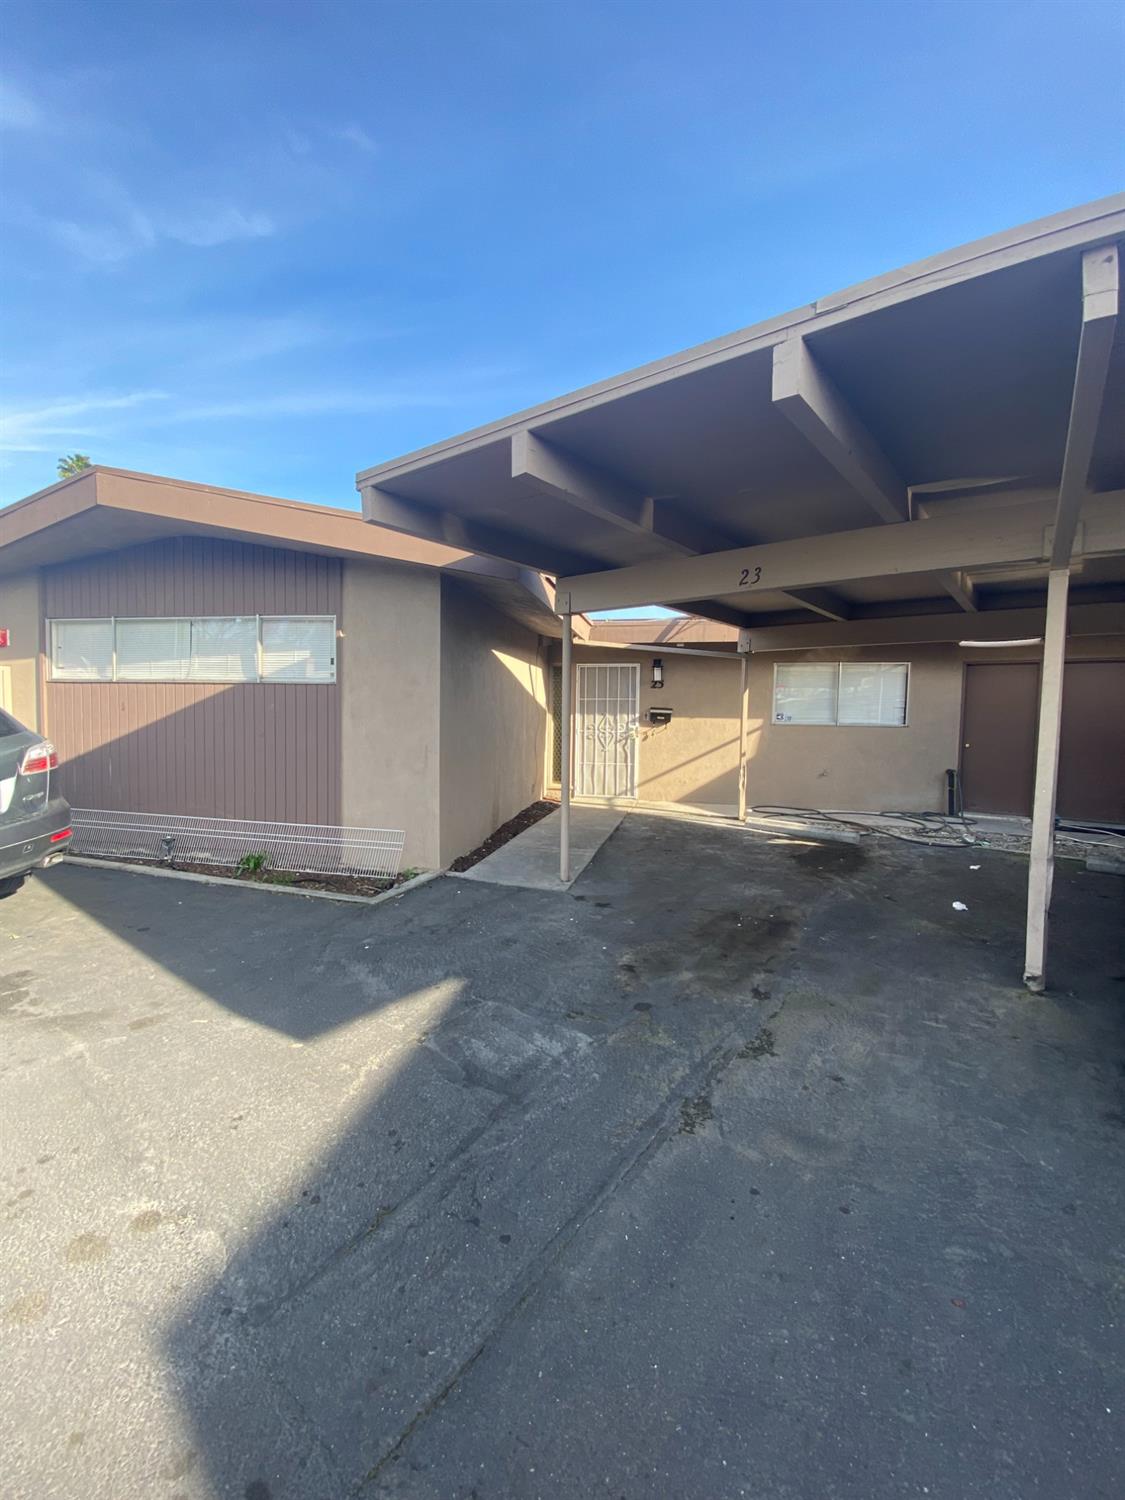 Photo of 805 Tully Rd #23 in Modesto, CA